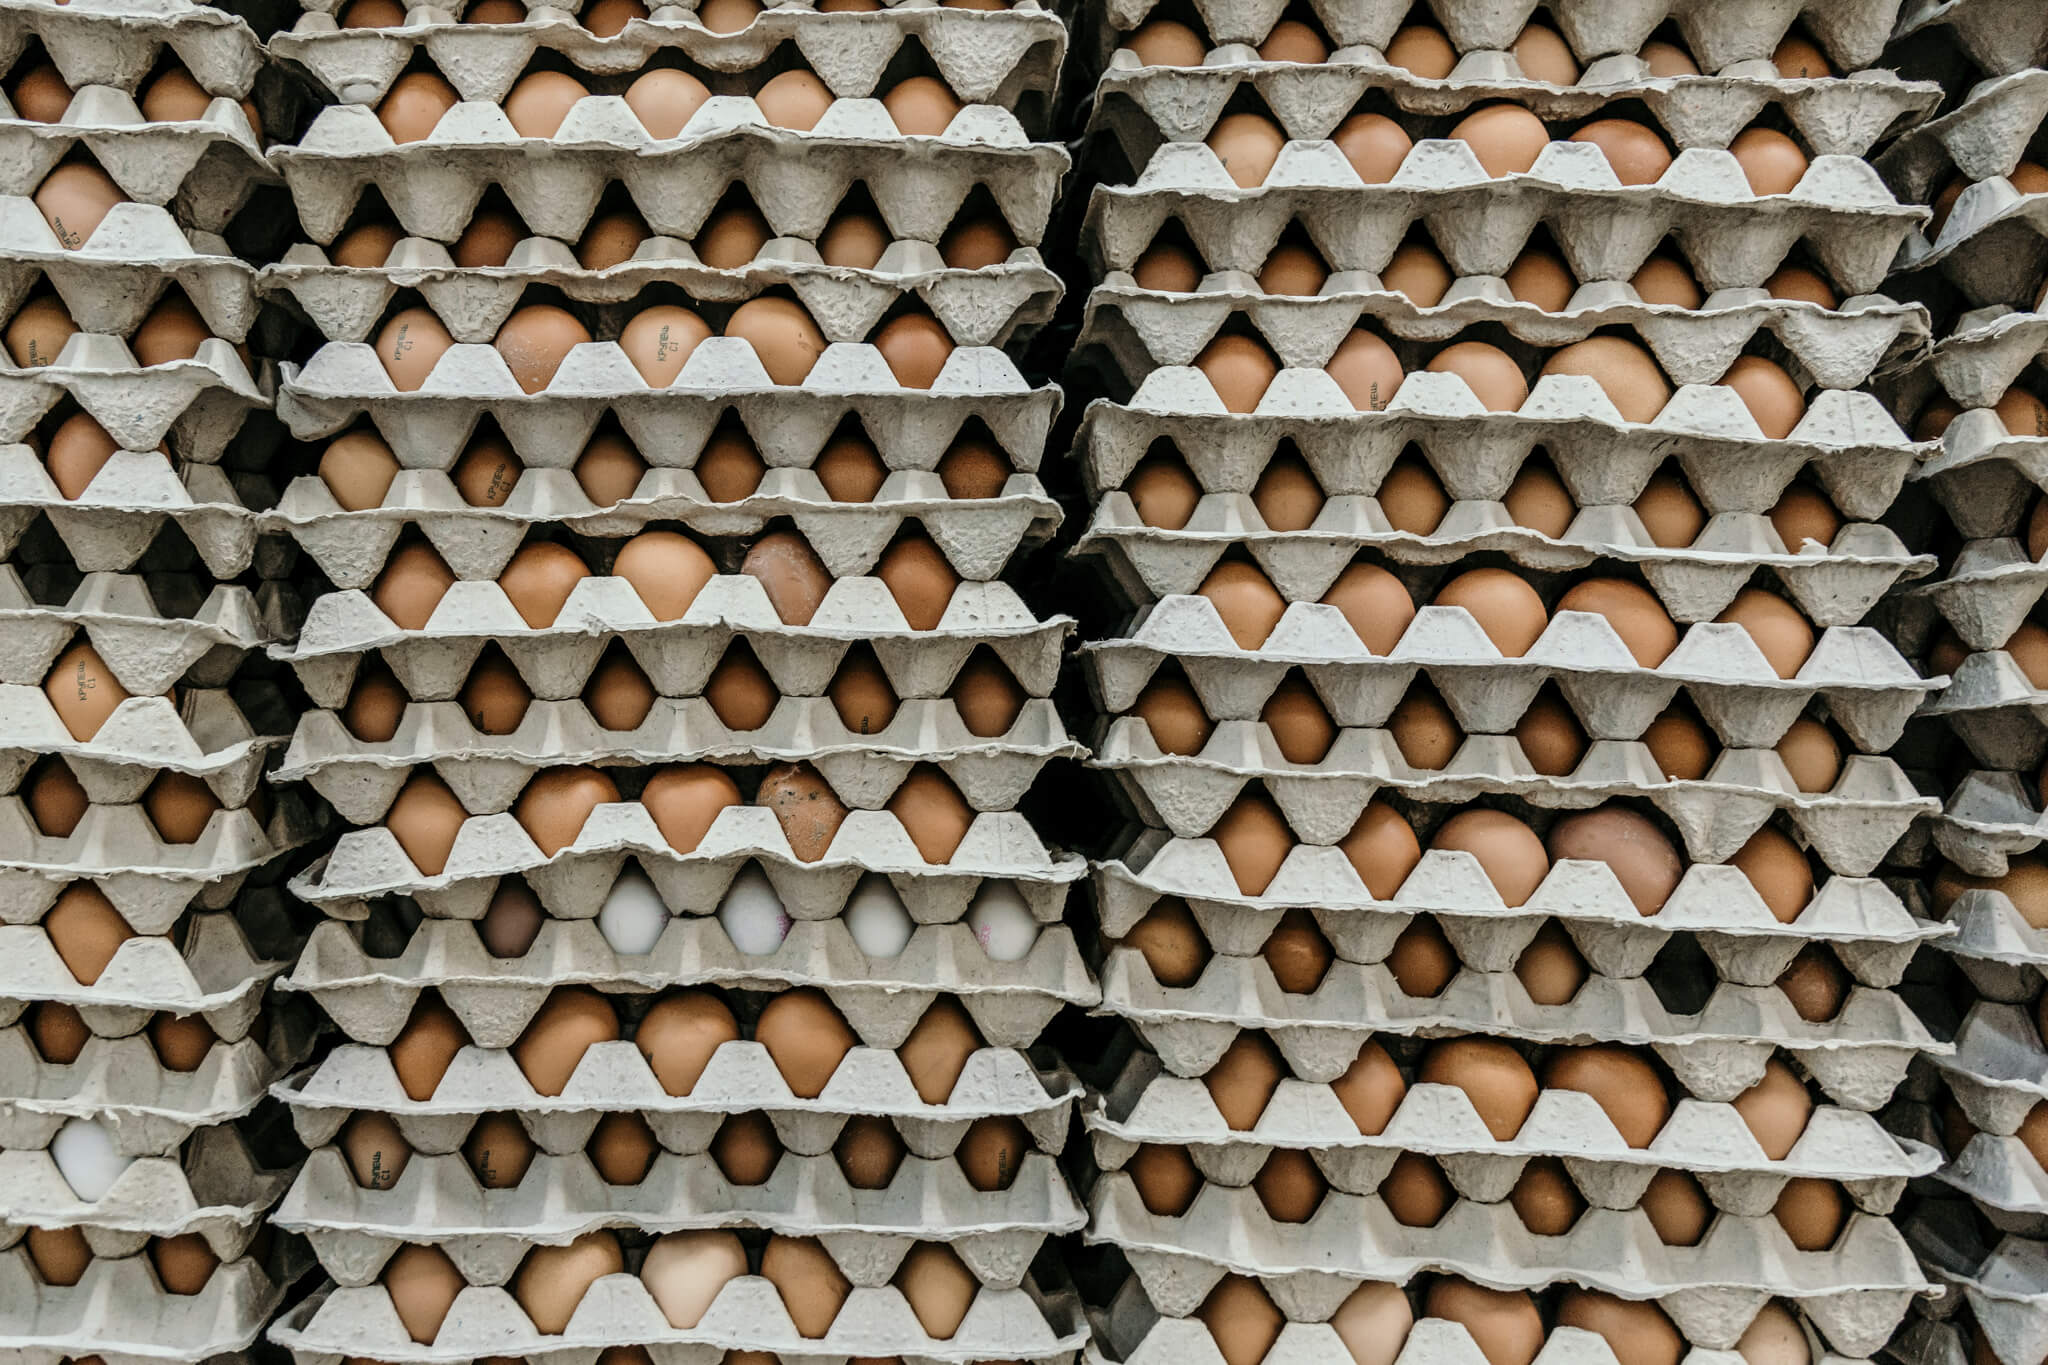 Stacks of brown chicken eggs in crates.